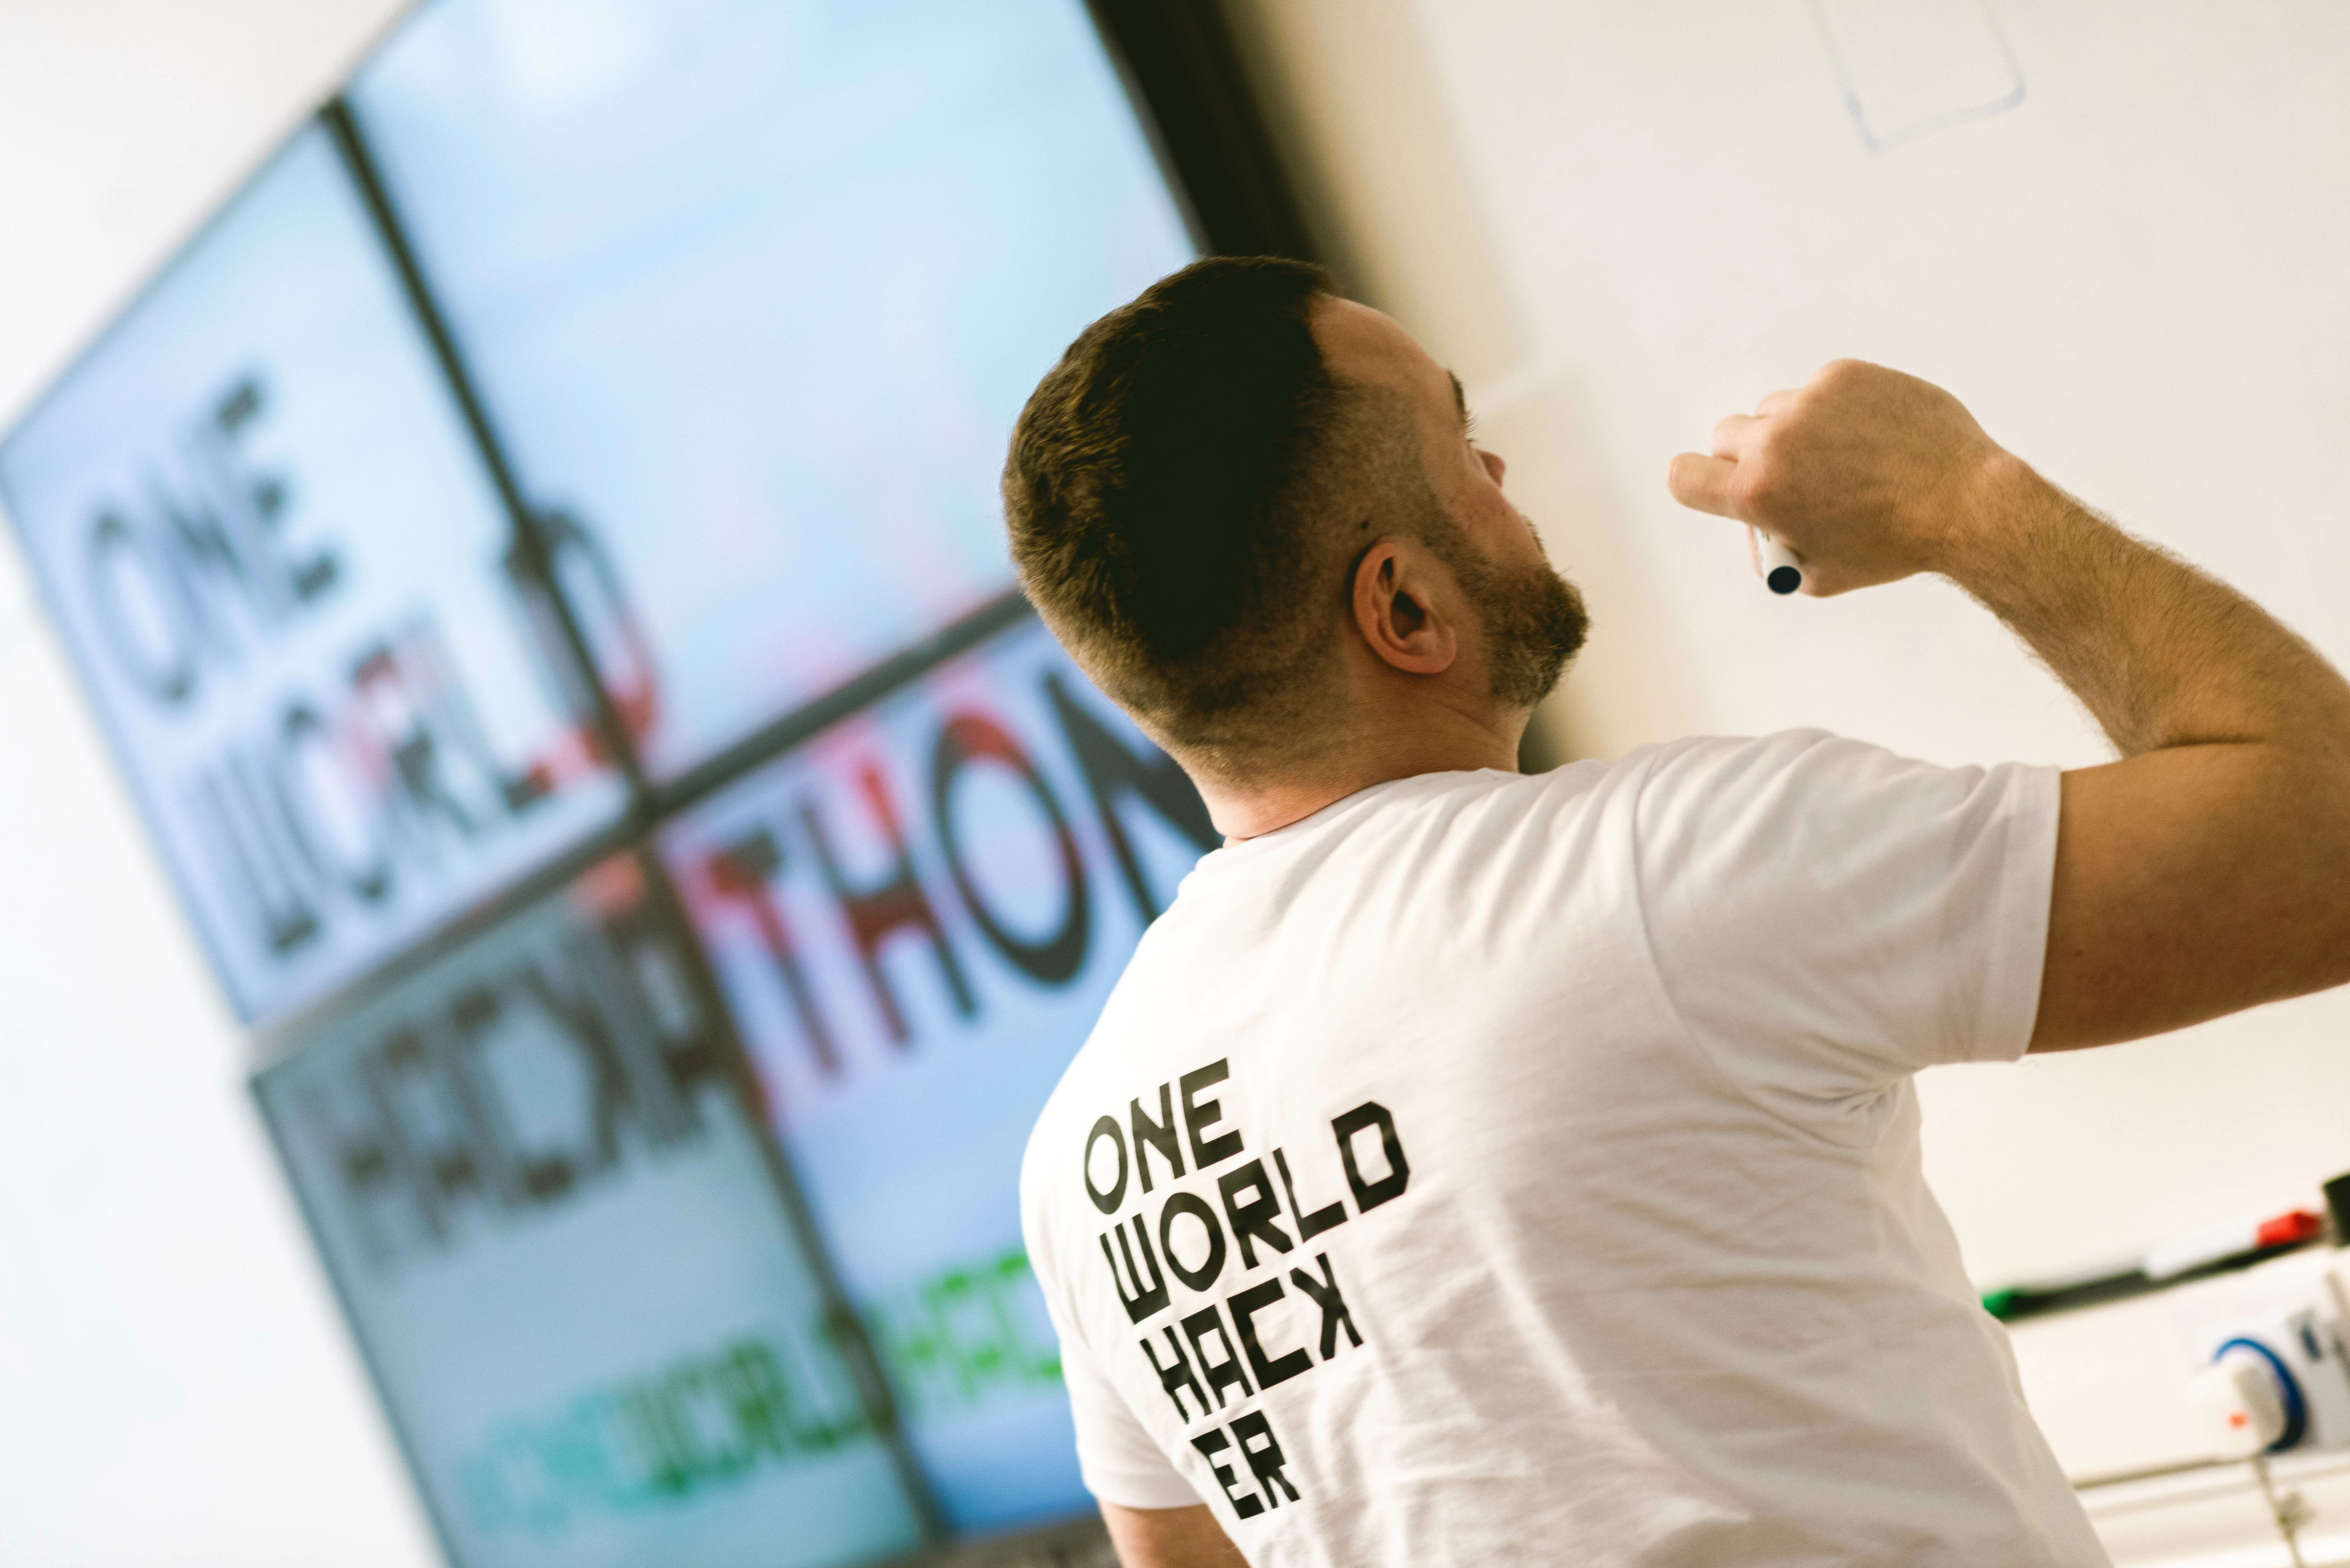 One World Hackathon team launch web app to support One World Strong Foundation